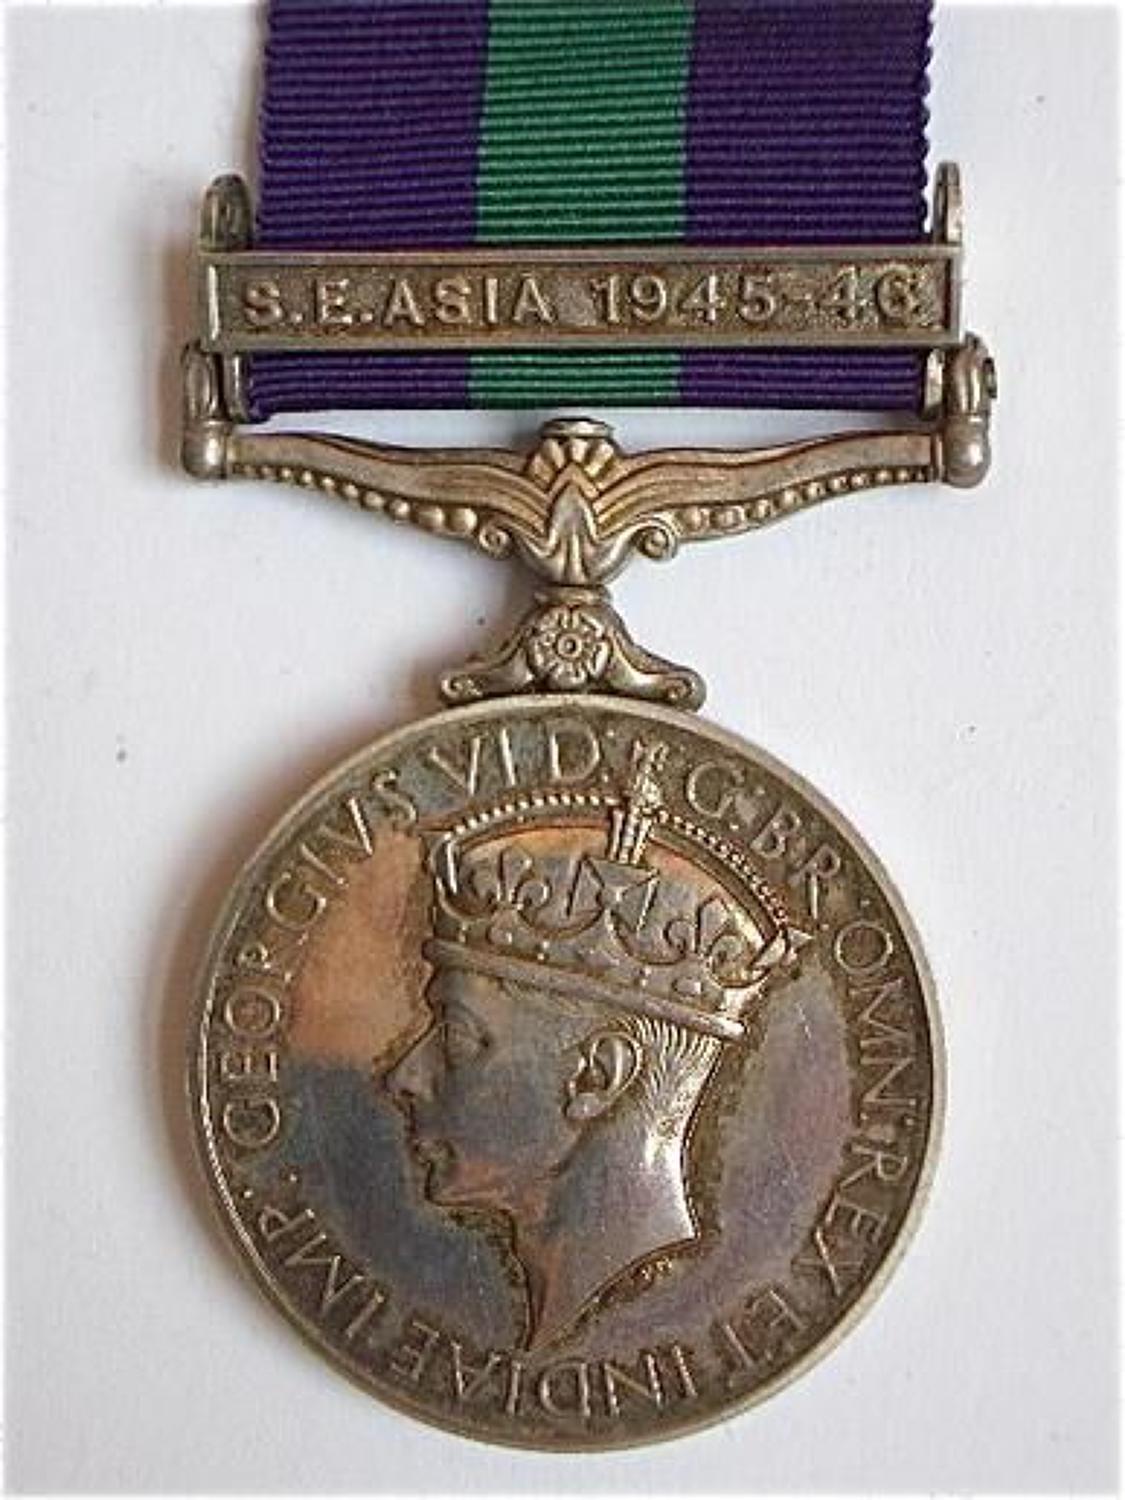 Royal Signals Officer’s General Service Medal, “S.E. Asia 1945-46